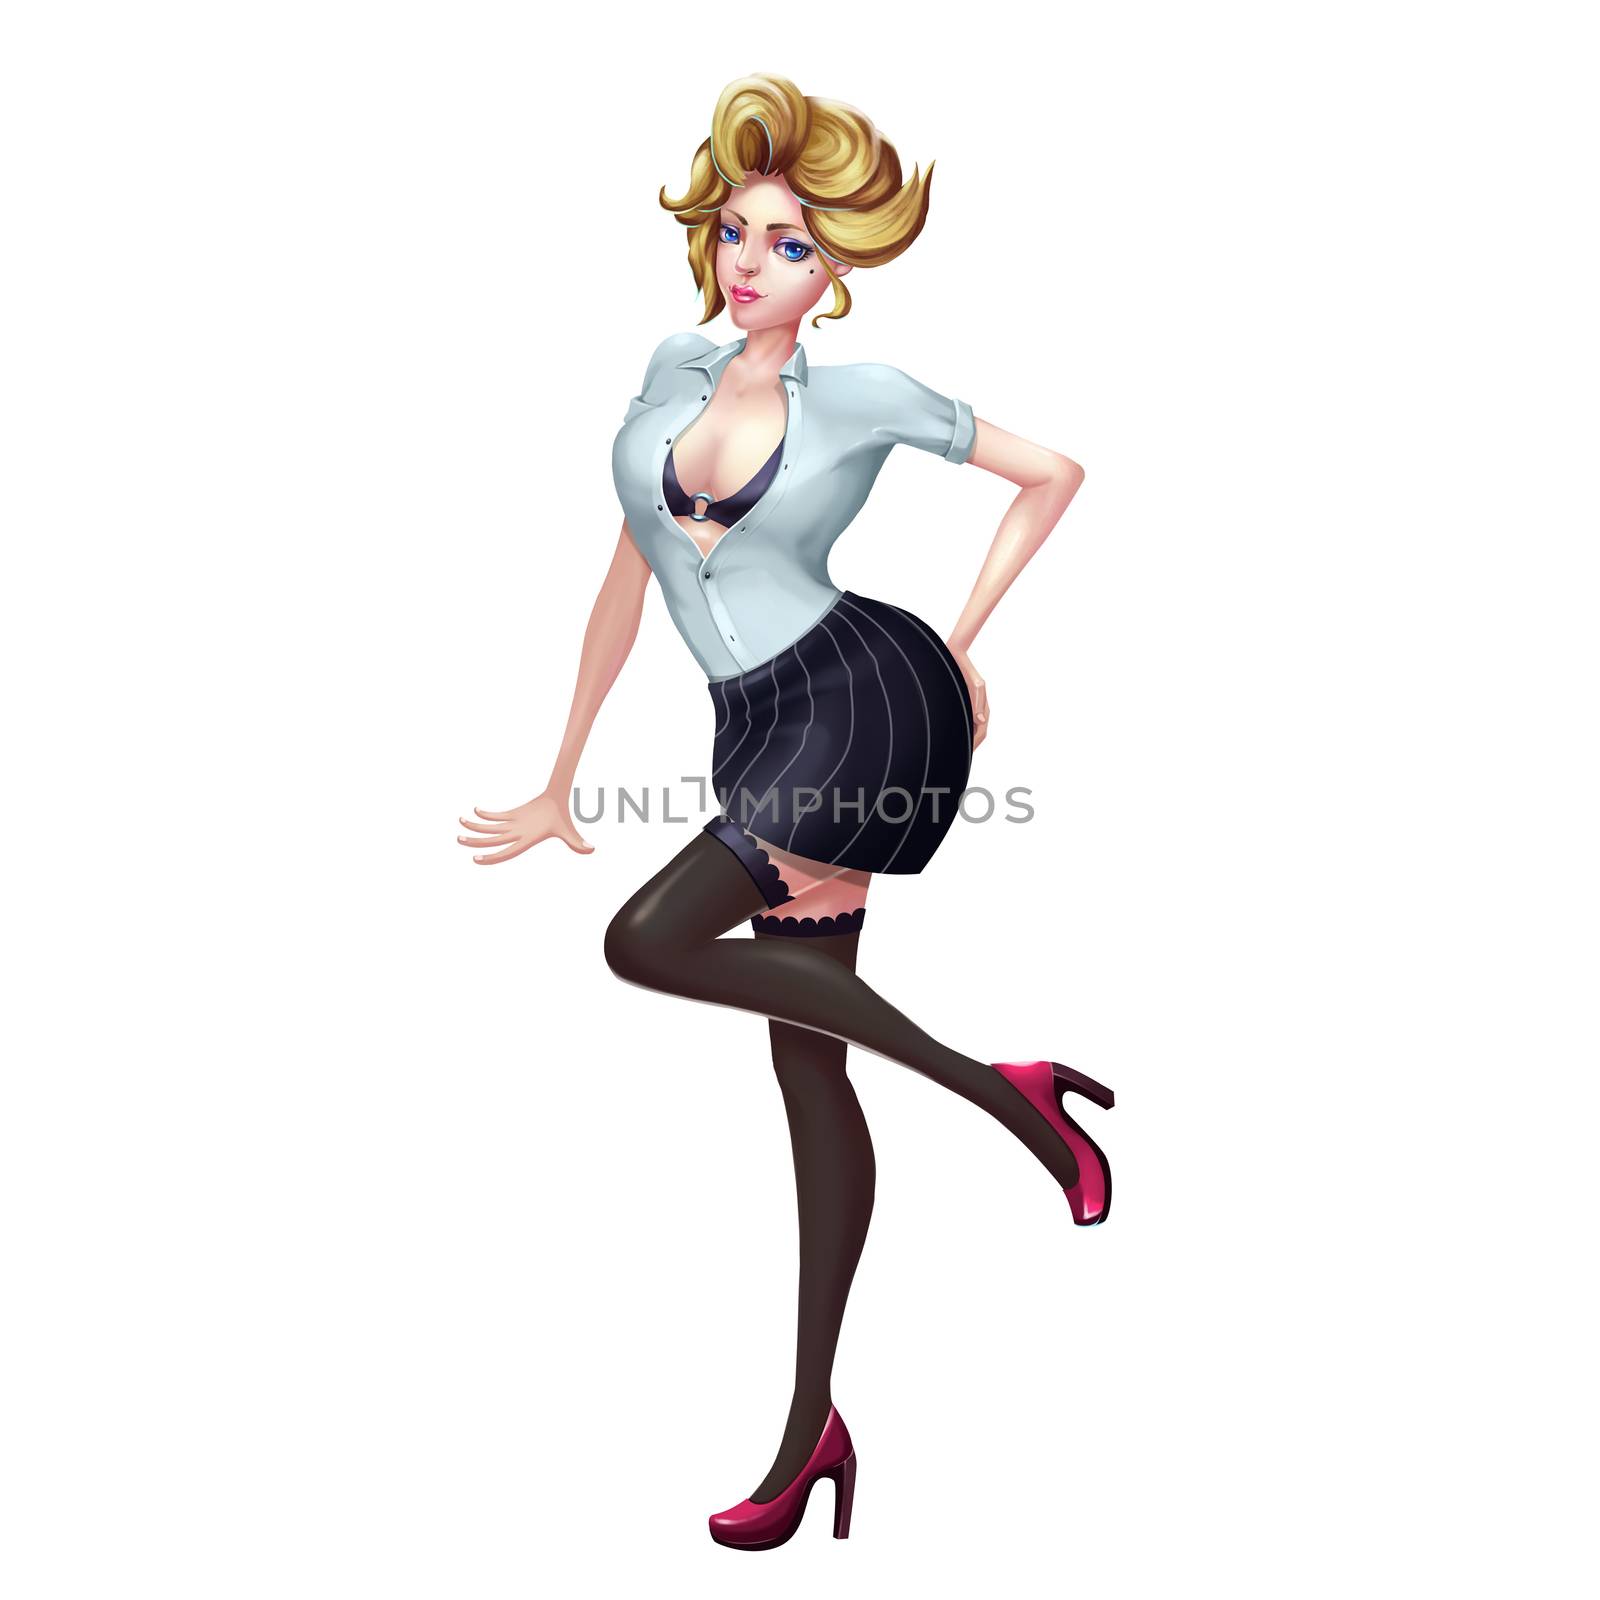 High Definition Illustration: Seductive Women Set with Fewer and Fewer Clothes. Realistic Cartoon Style Character Design. by NextMars